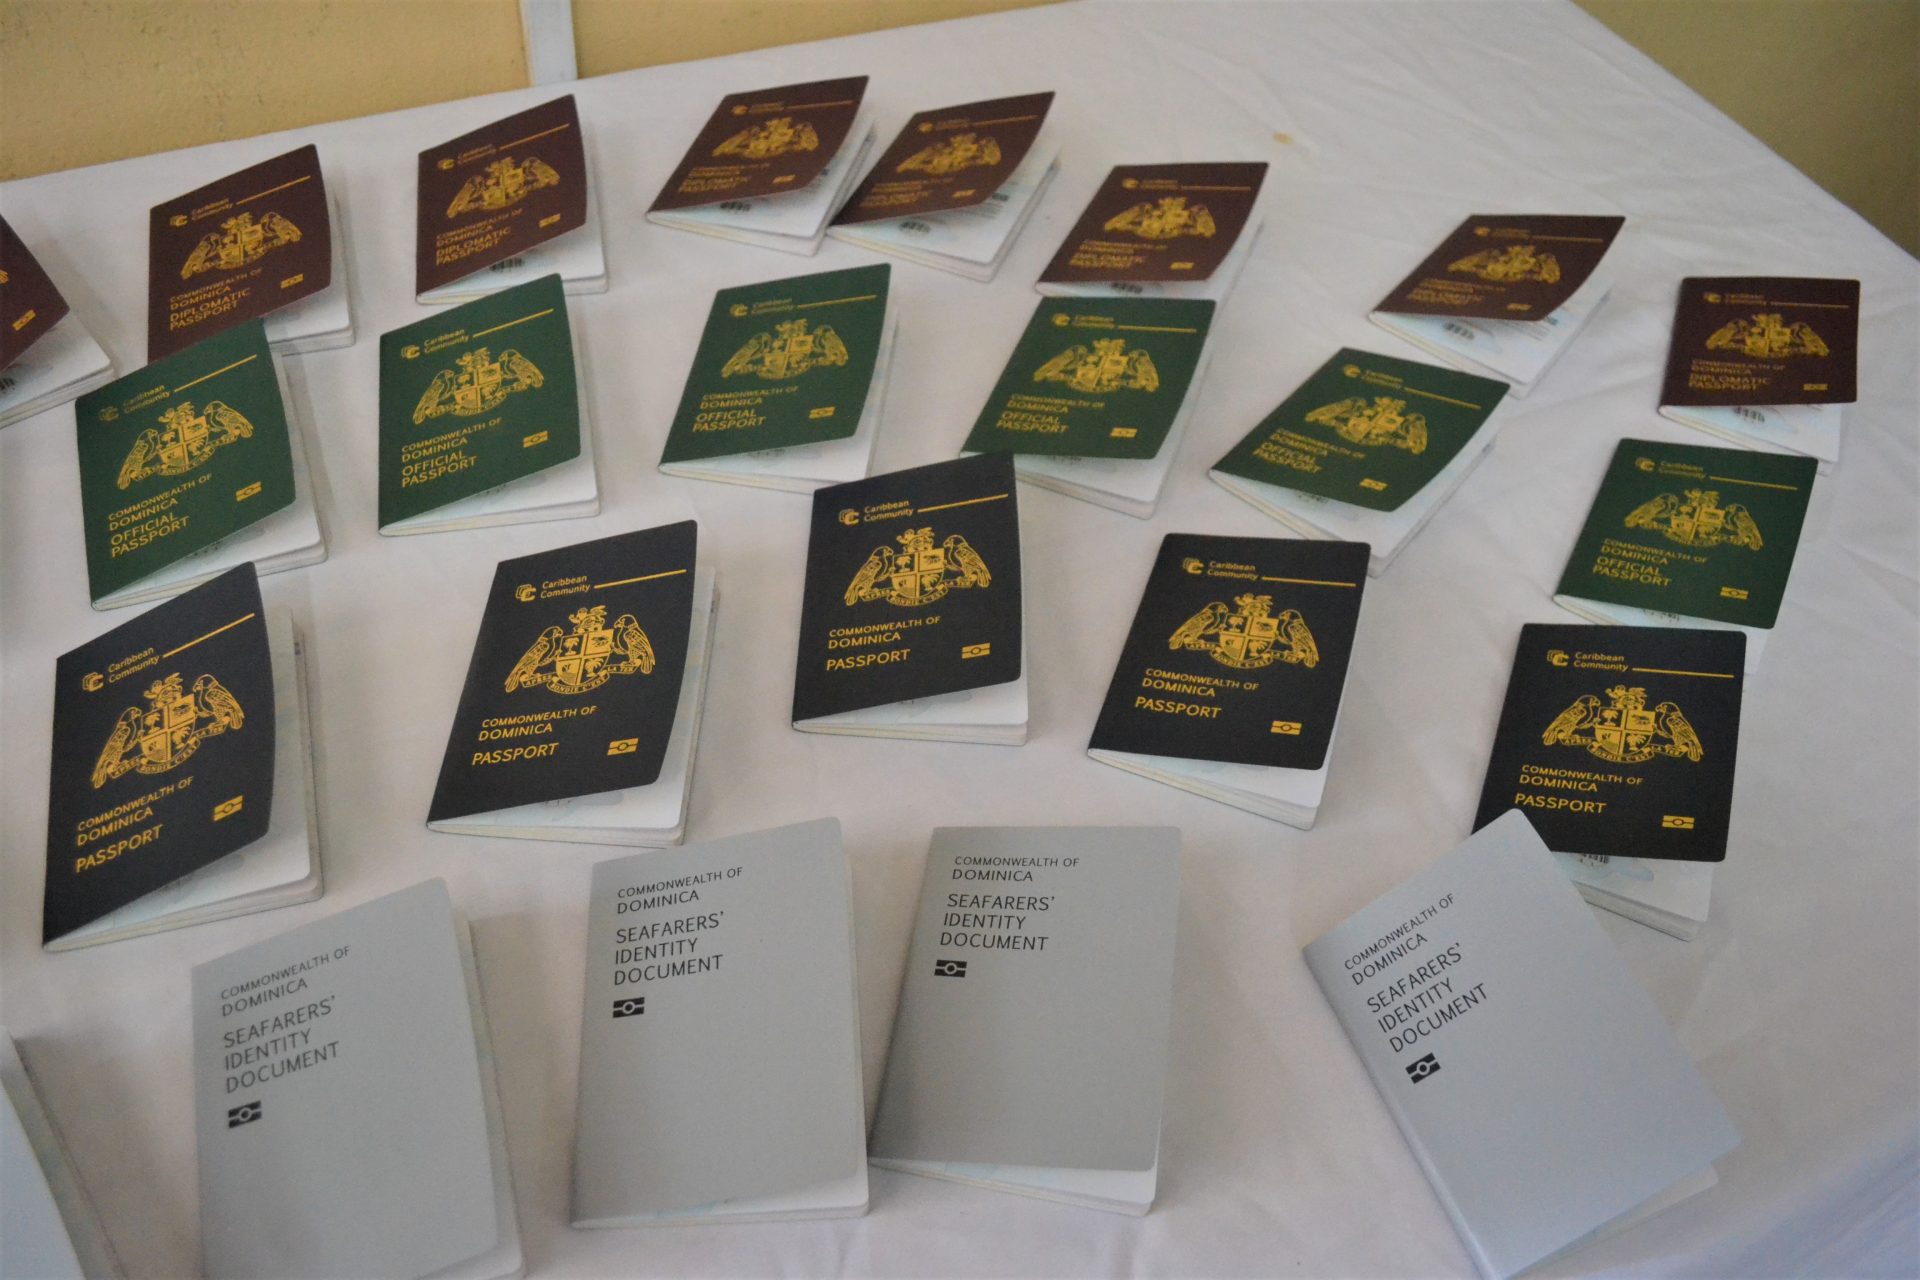 Dominica S Deadline For Complete Adoption Of E Passport Is Now August 2022 Dominica News Online